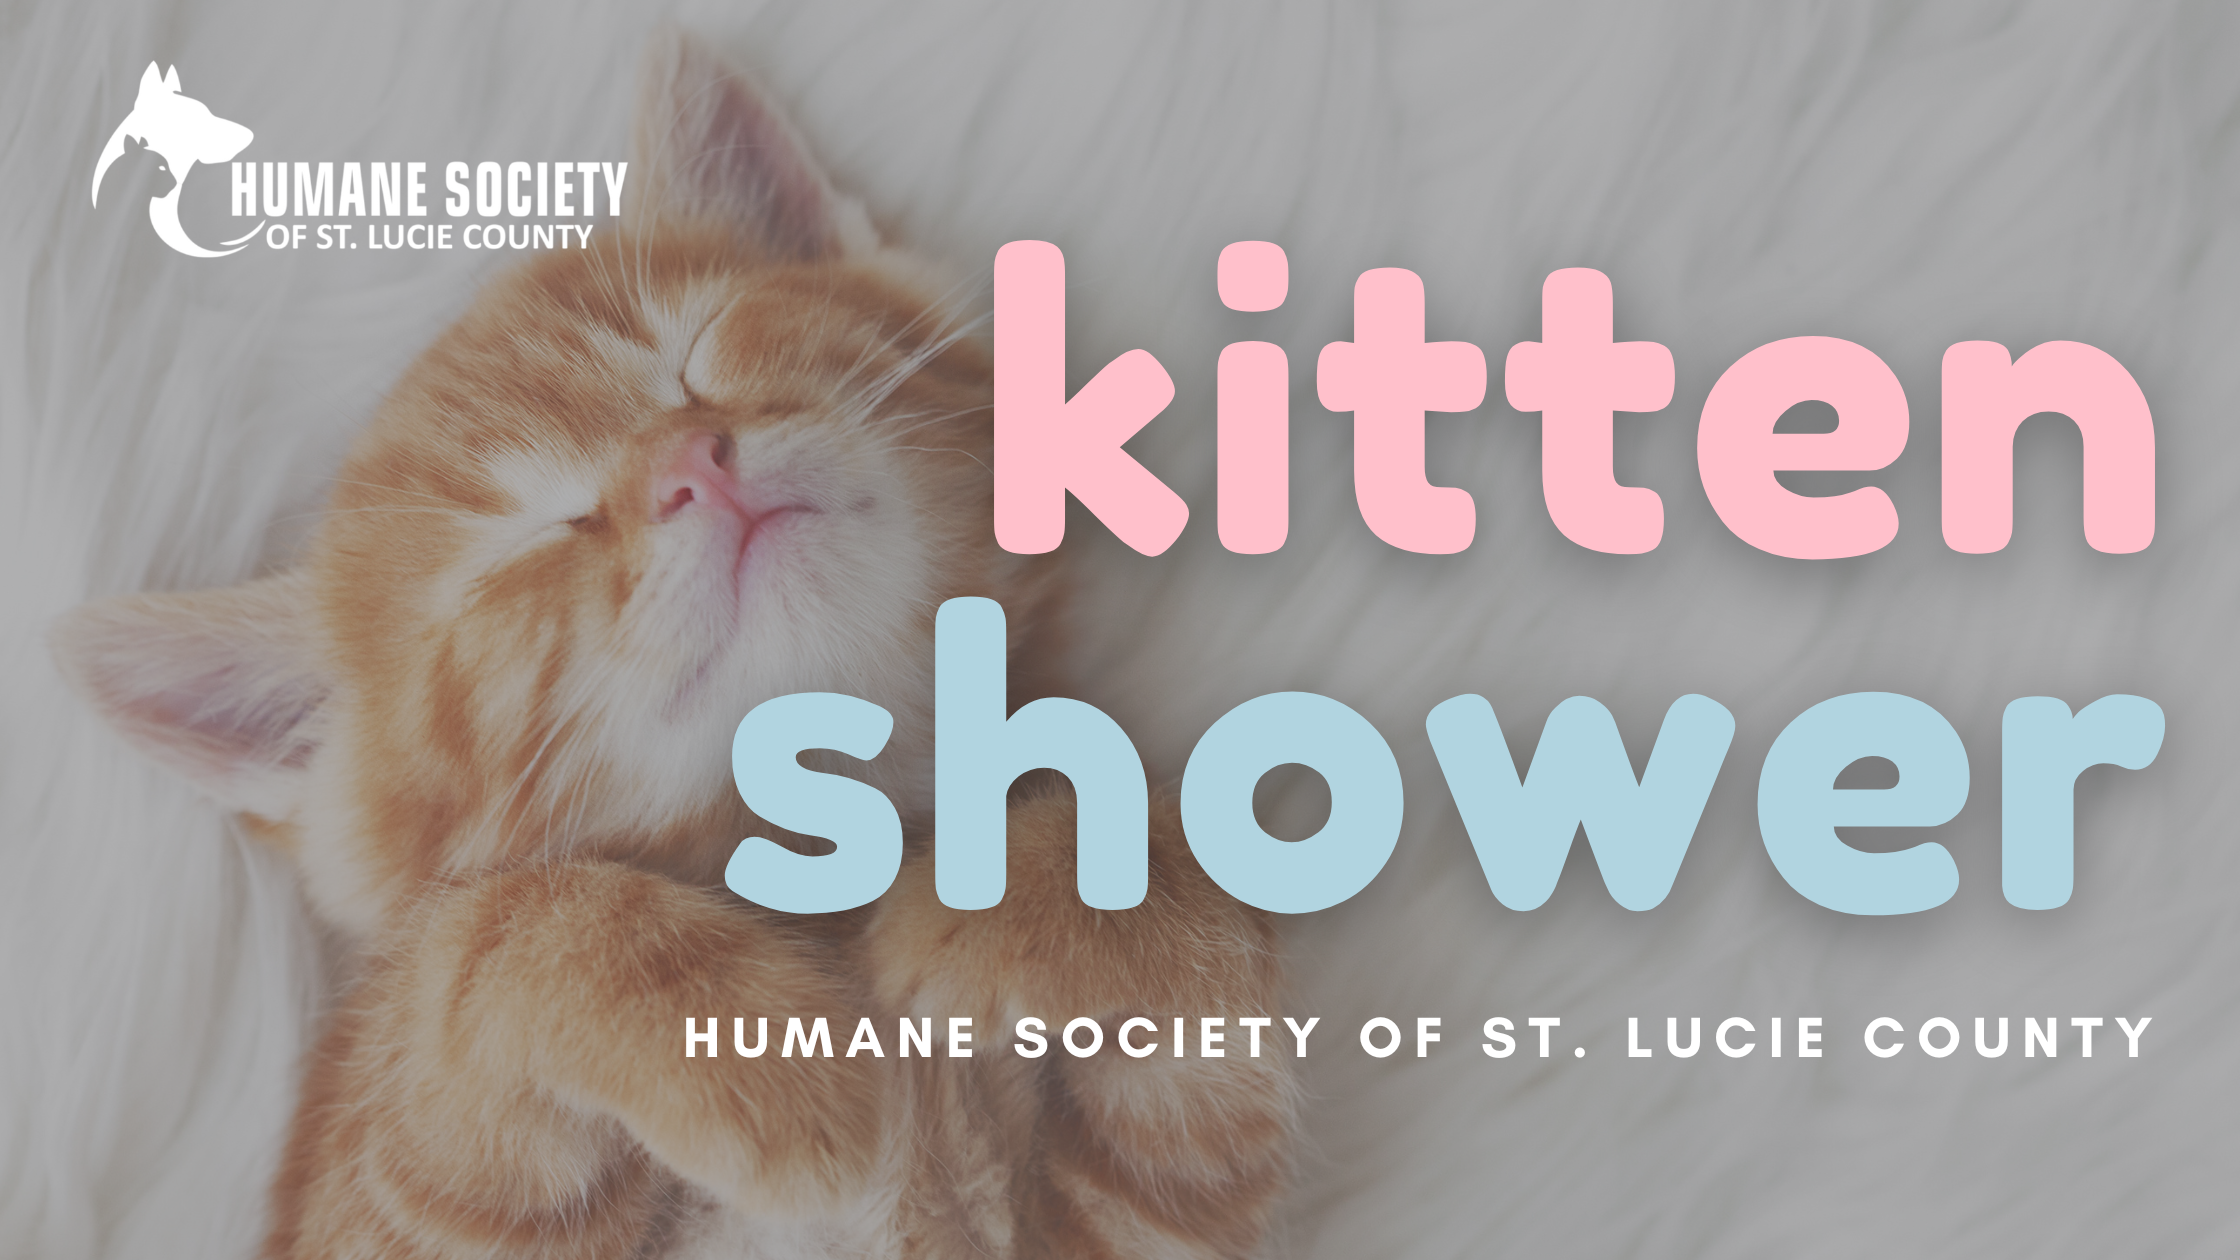 Kitten Shower at the Humane Society of St. Lucie County